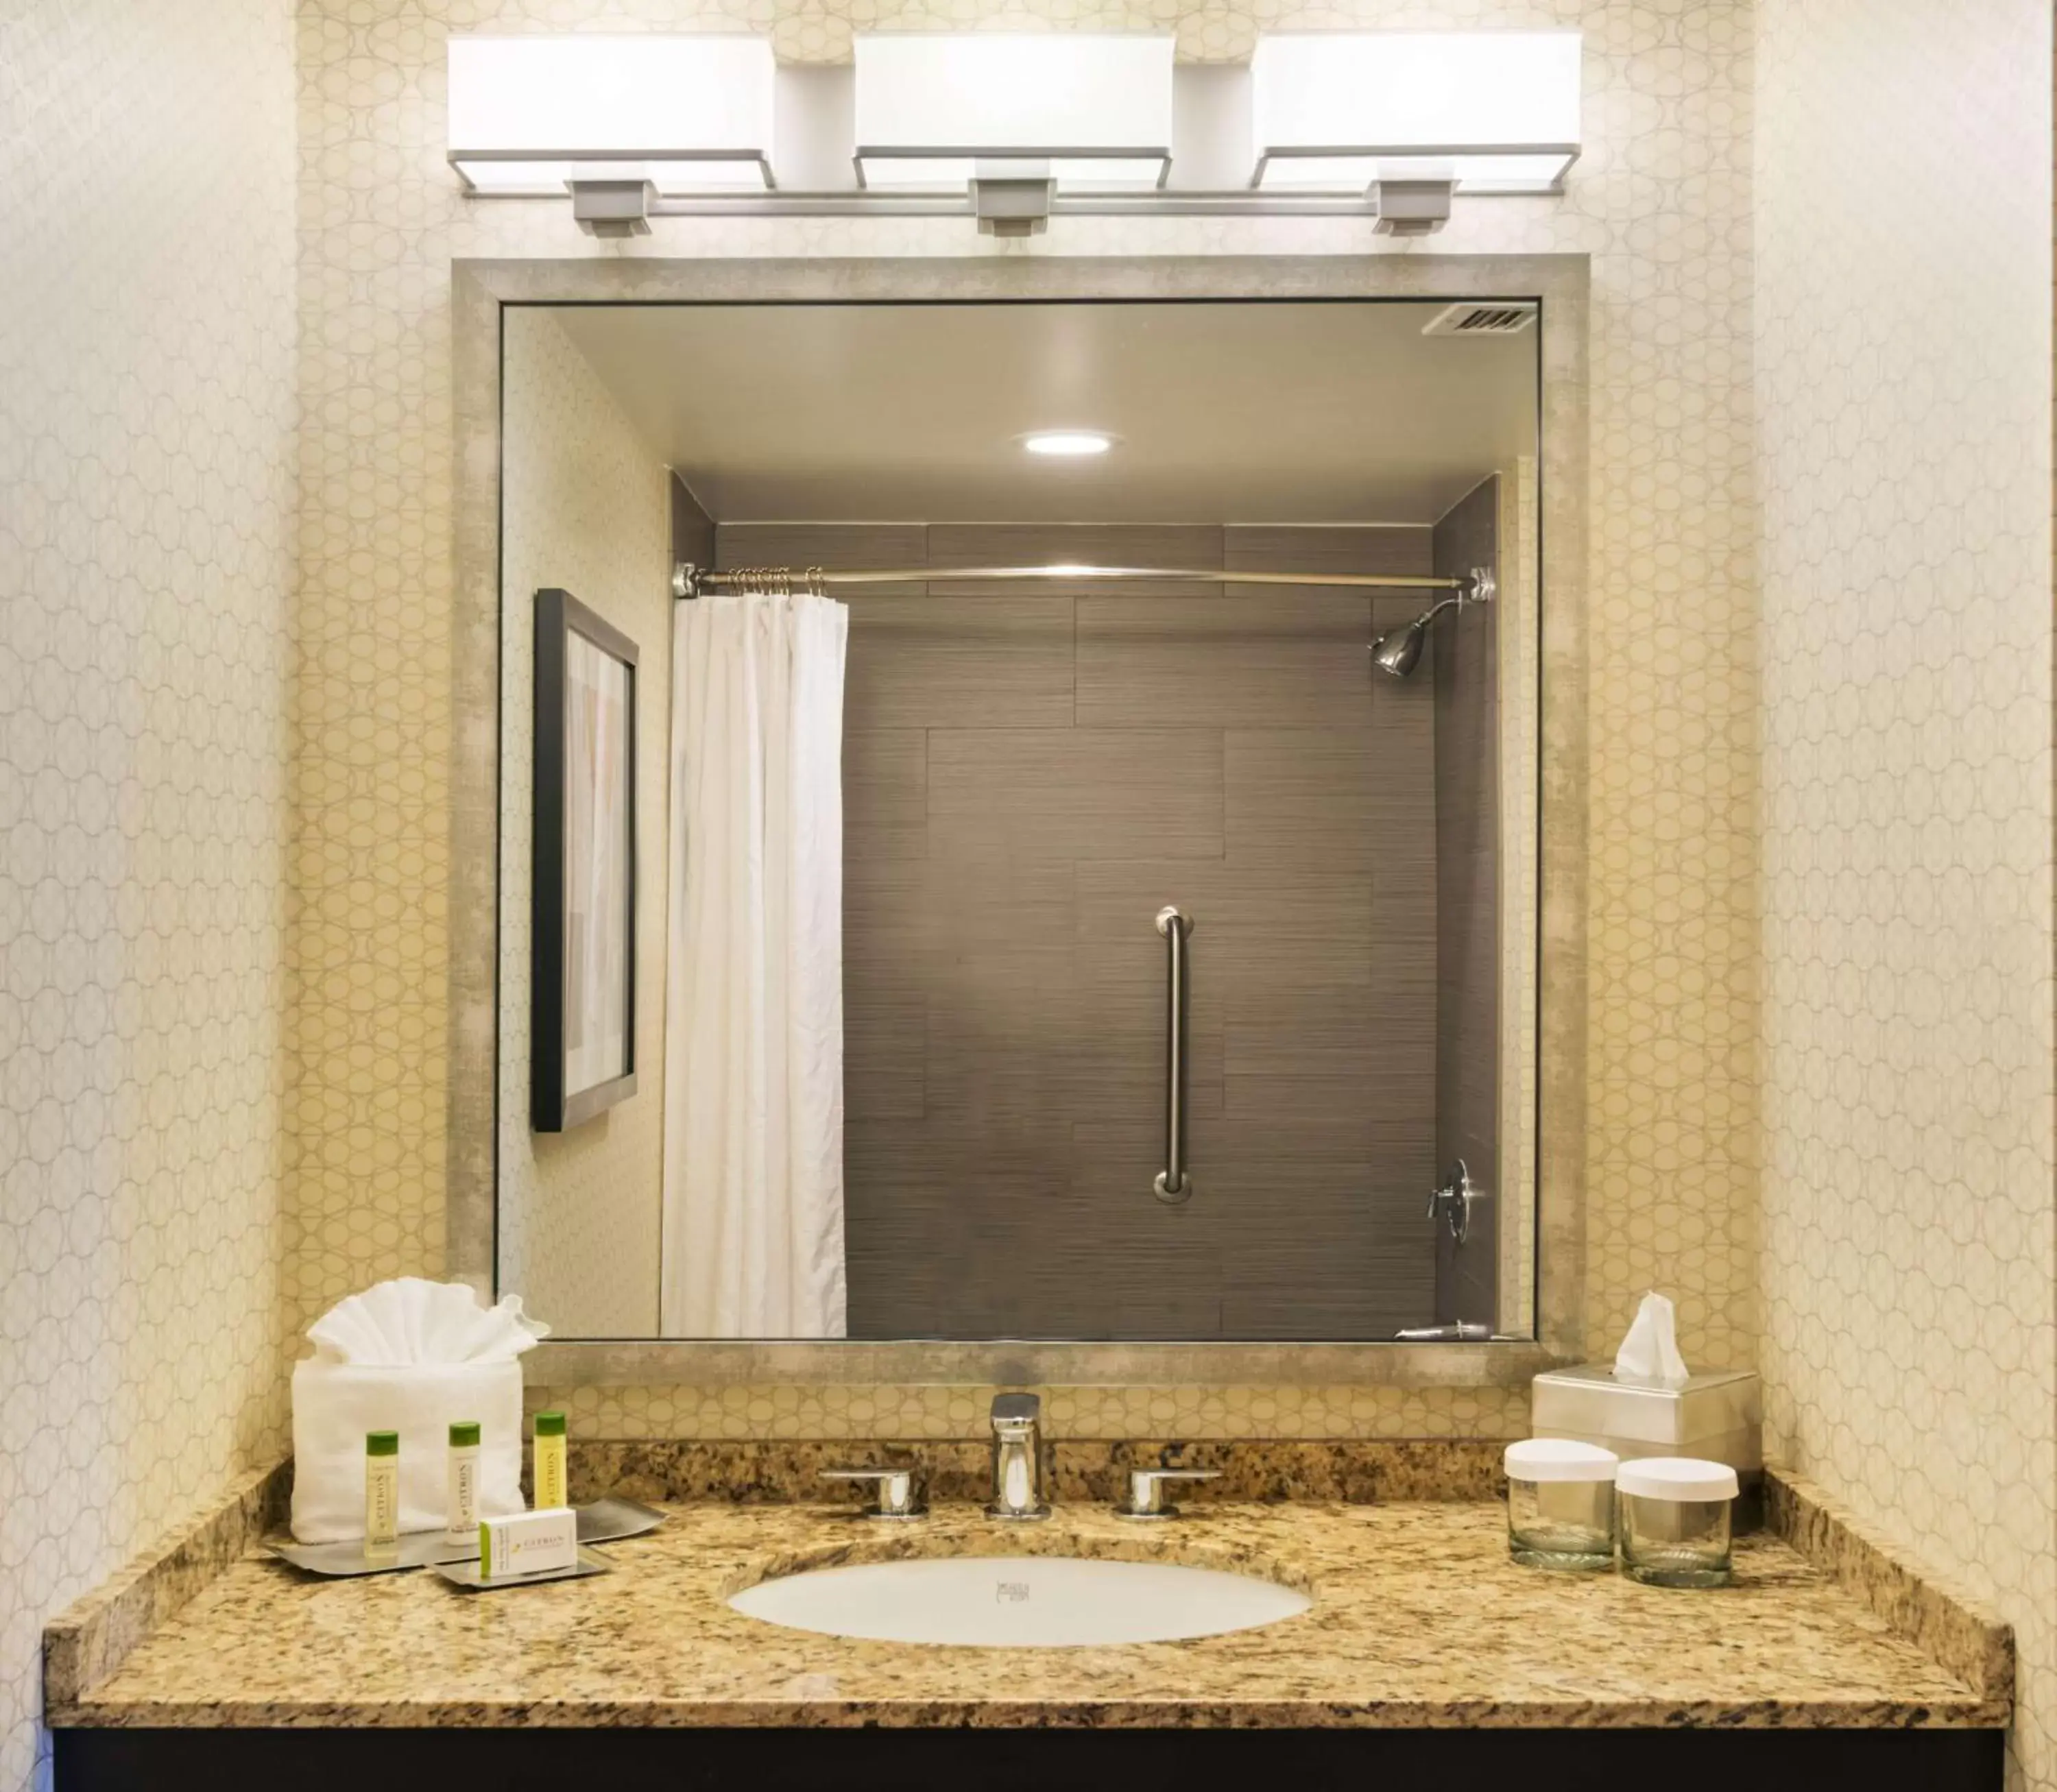 Bathroom in DoubleTree Suites by Hilton Hotel Austin